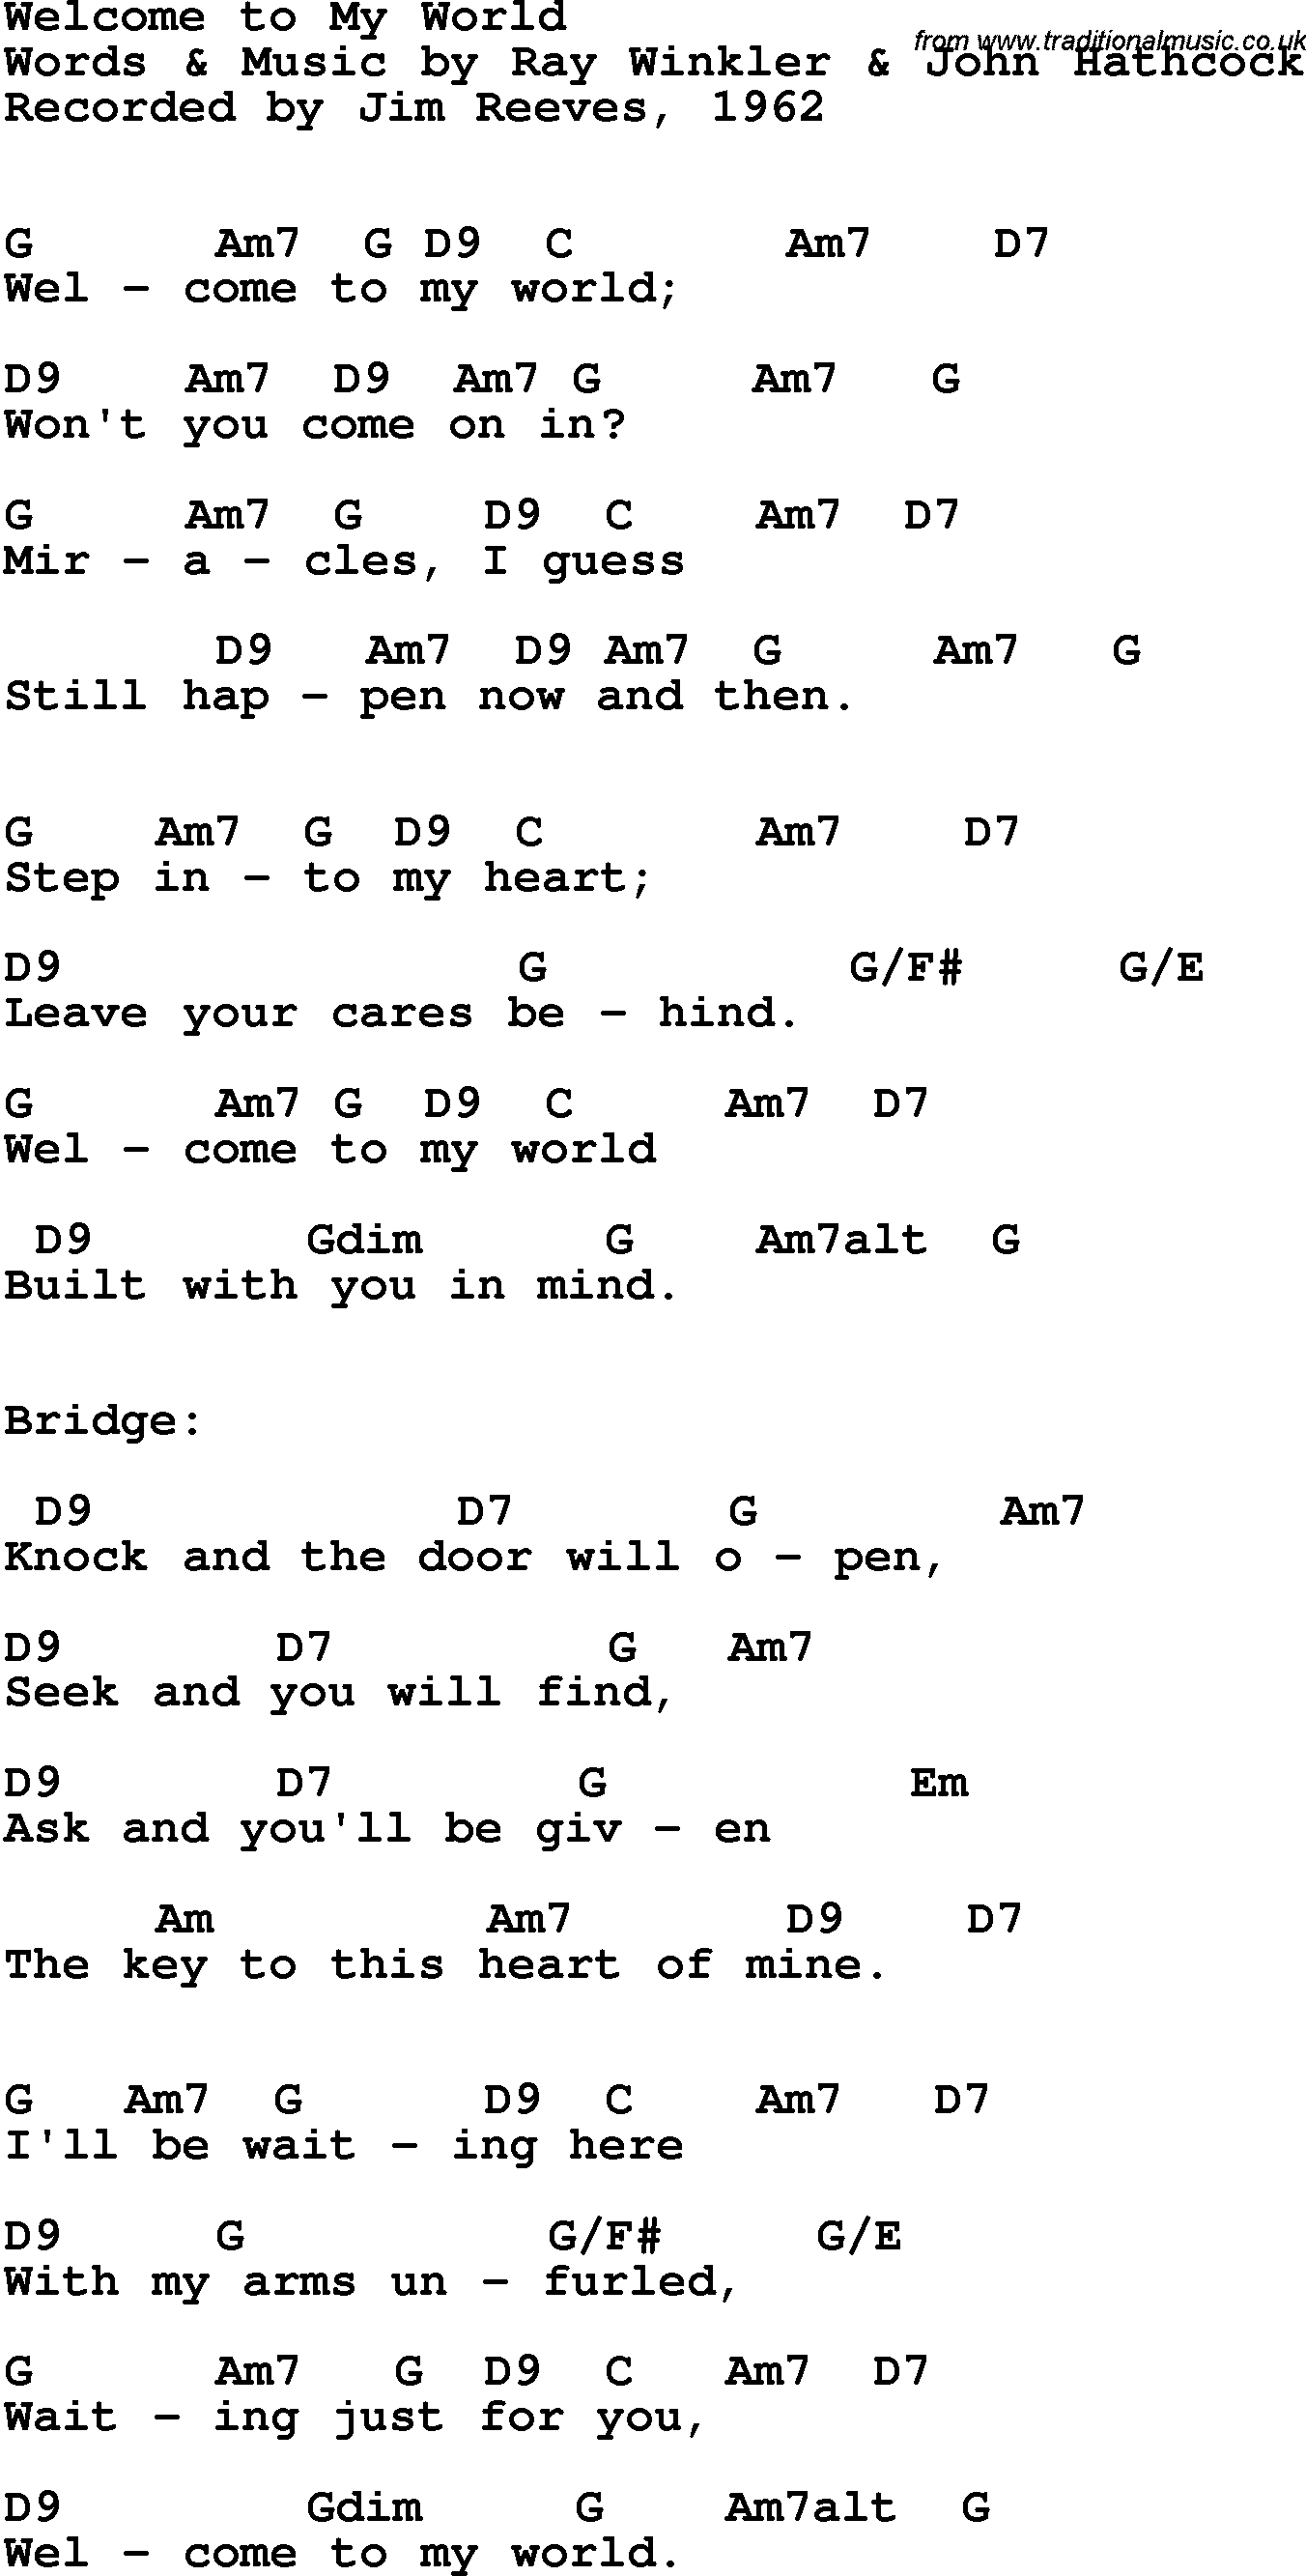 Song Lyrics with guitar chords for Welcome To My World - Jim Reeves, 1962